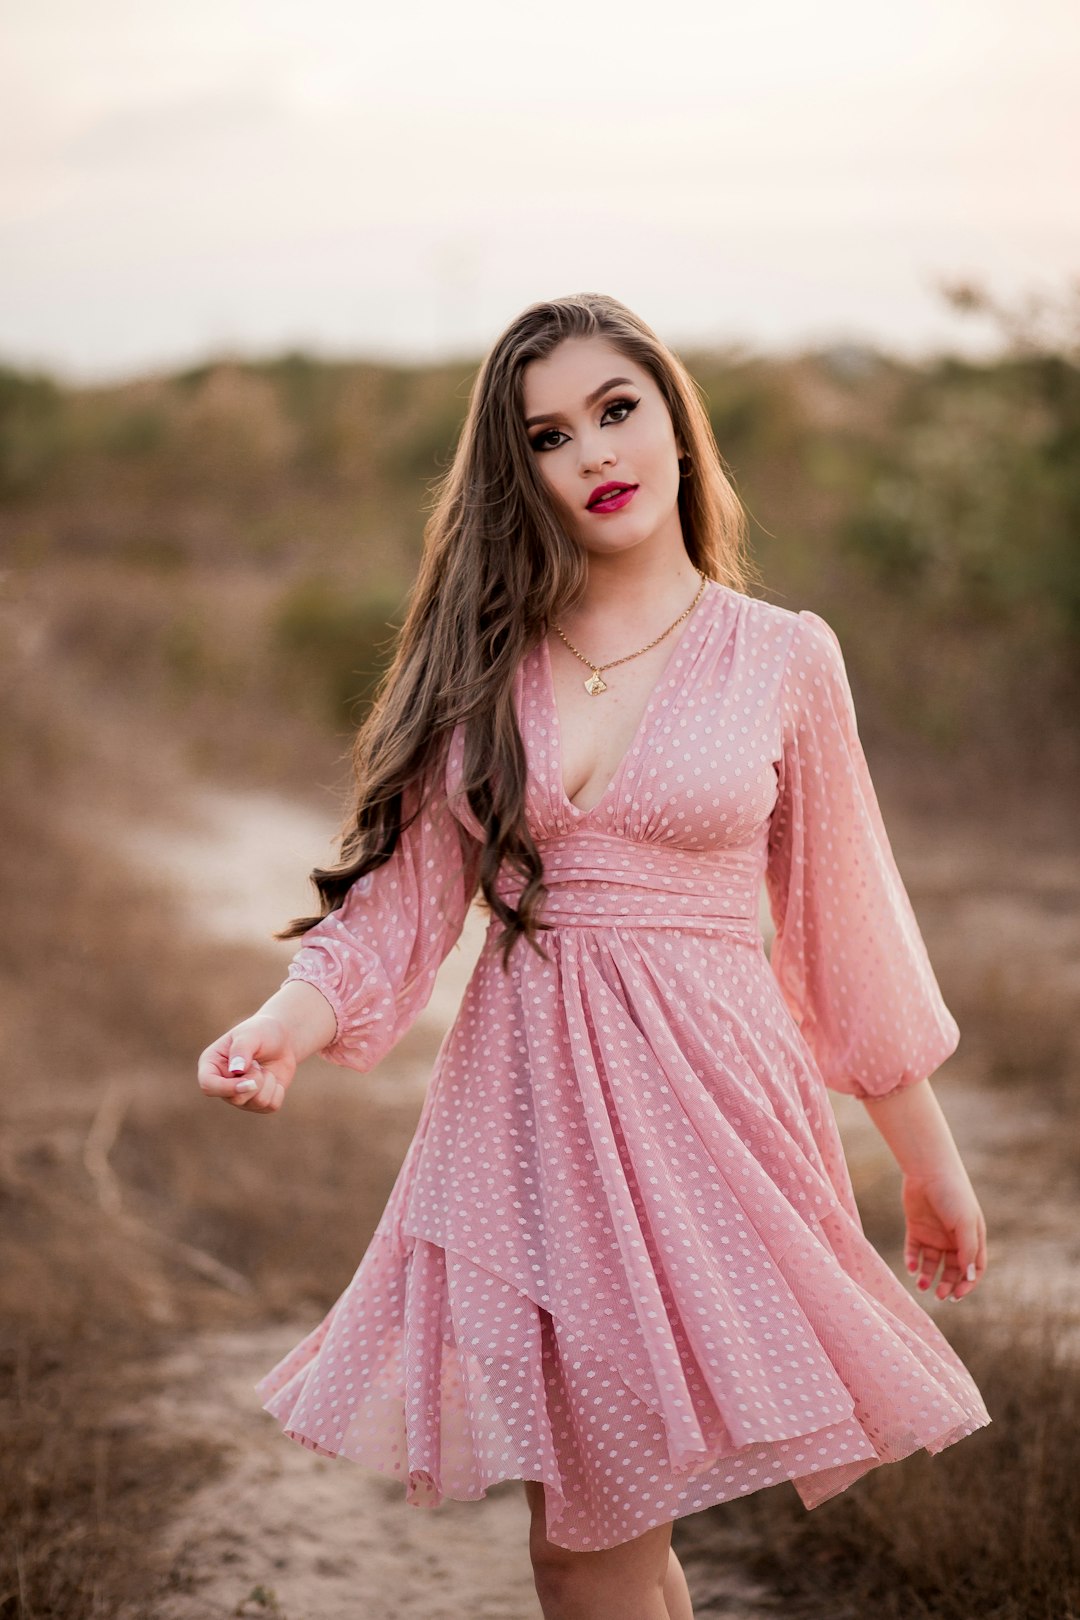 girl in pink dress standing on brown field during daytime